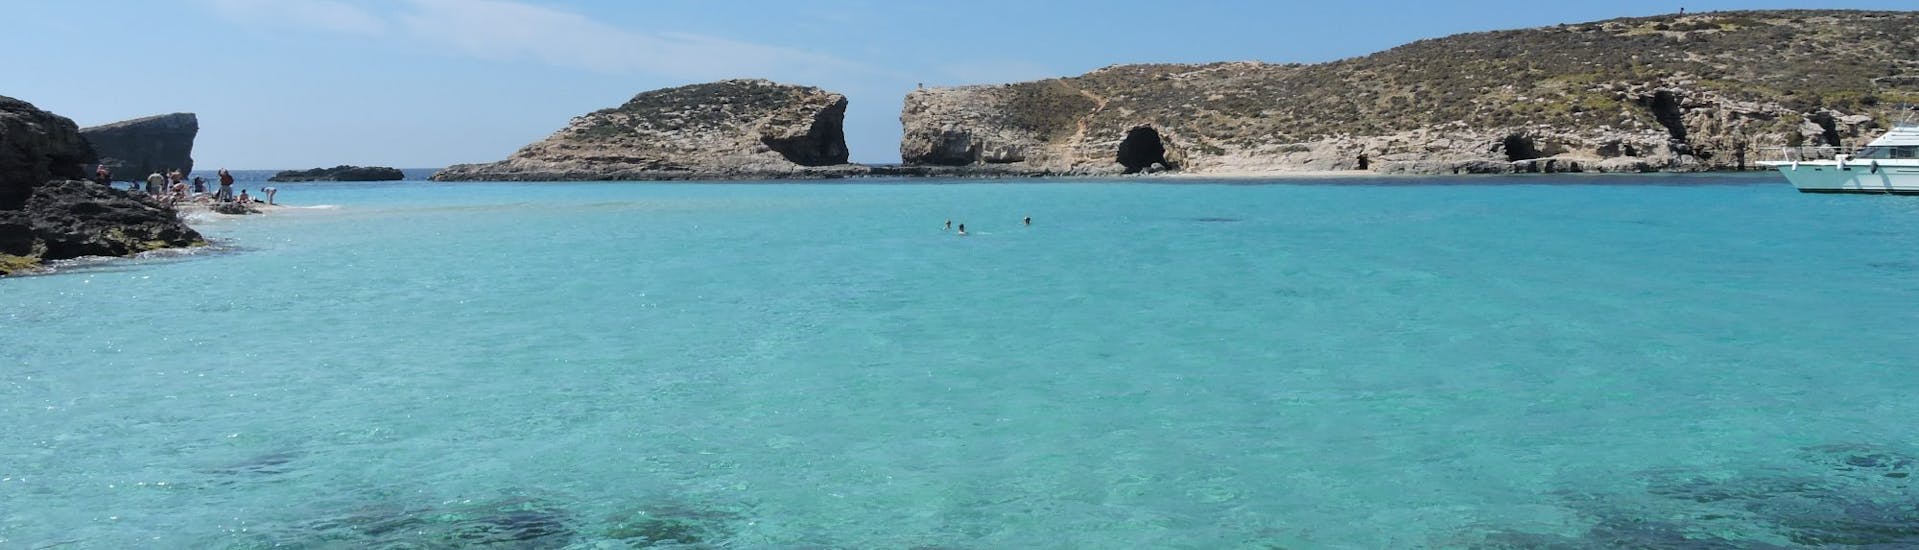 One of the lagoons where you will go during the Boat Trip from Sliema to Comino and Blue Lagoon with Luzzu Cruises Malta.